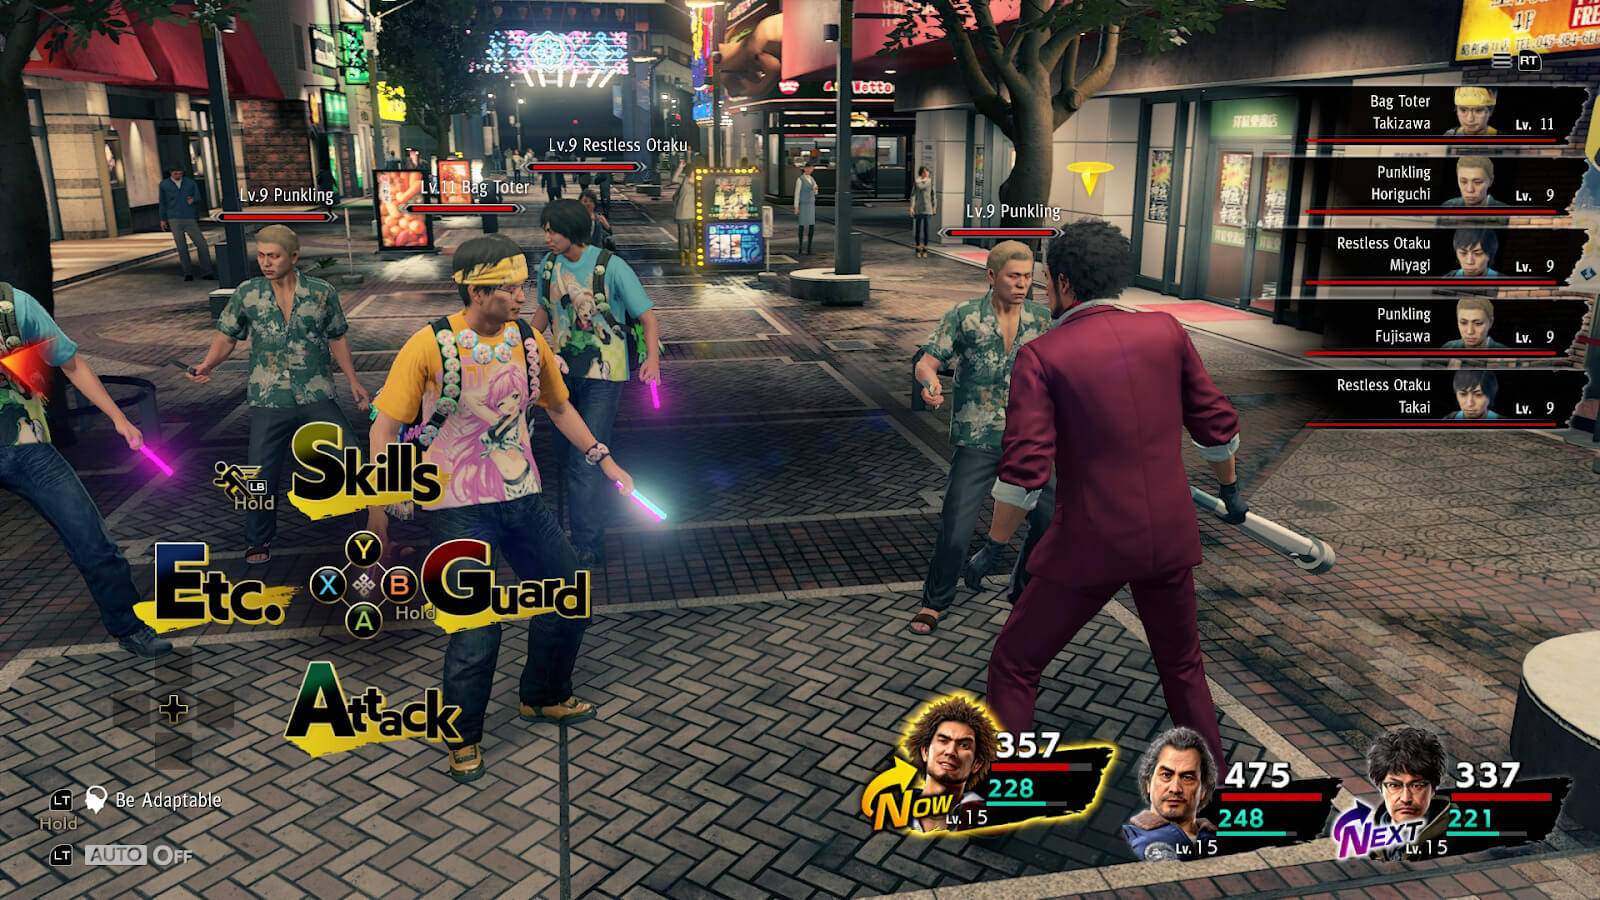 Yakuza: Like A Dragon features excellent turn-based combat